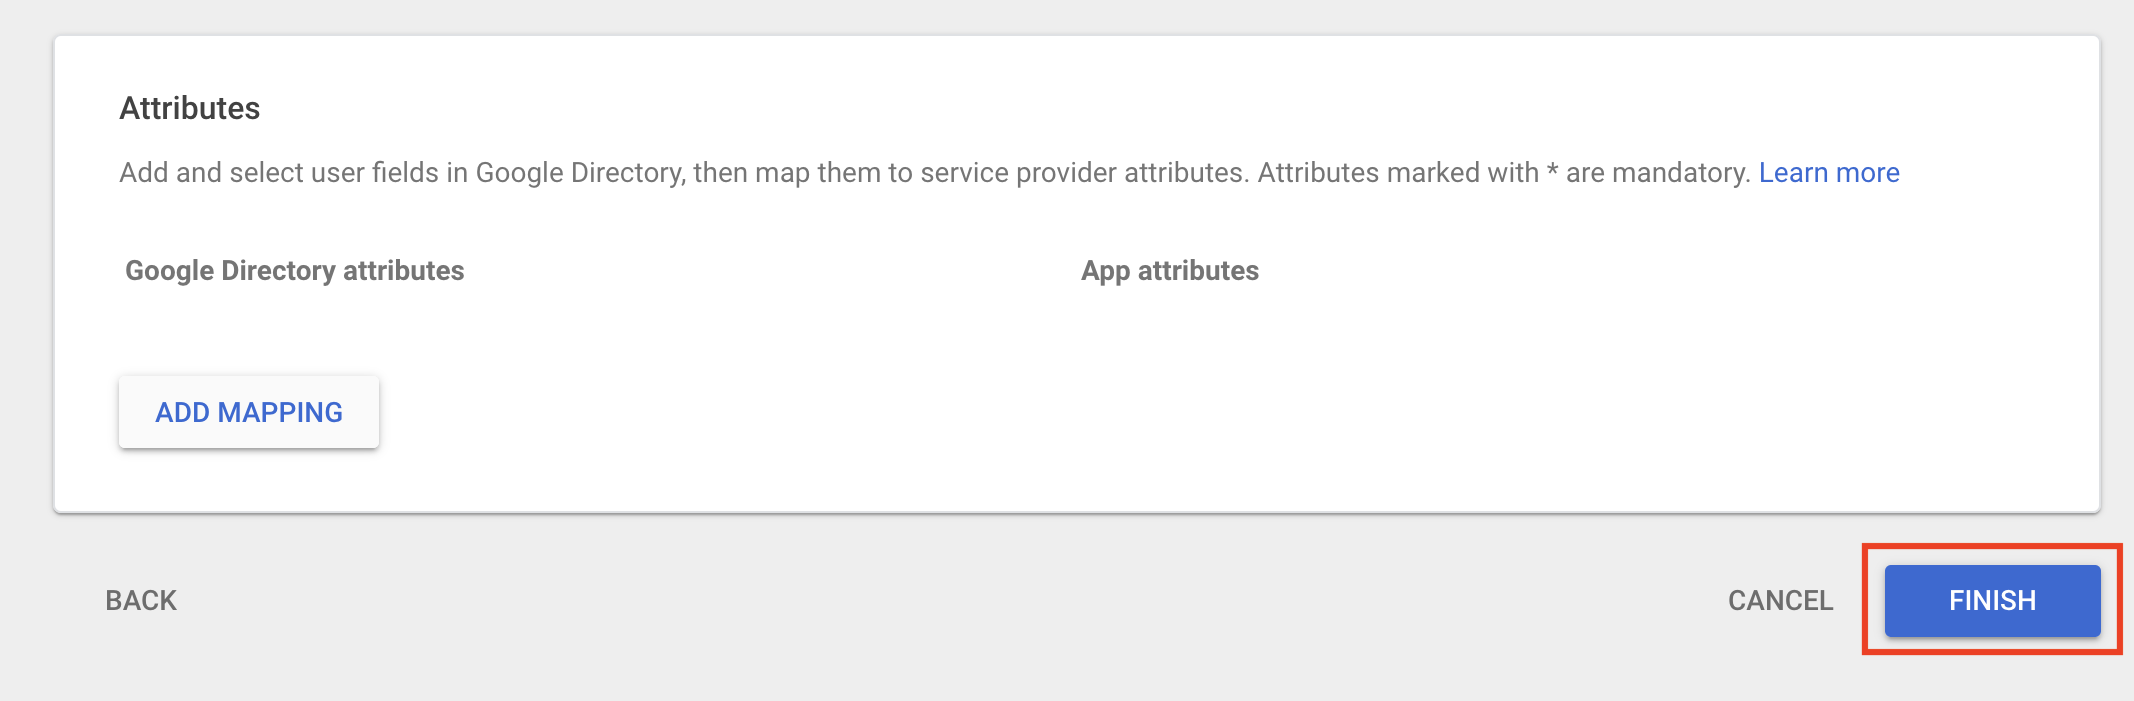 Finish configuring the new SAML app in Google Workspace